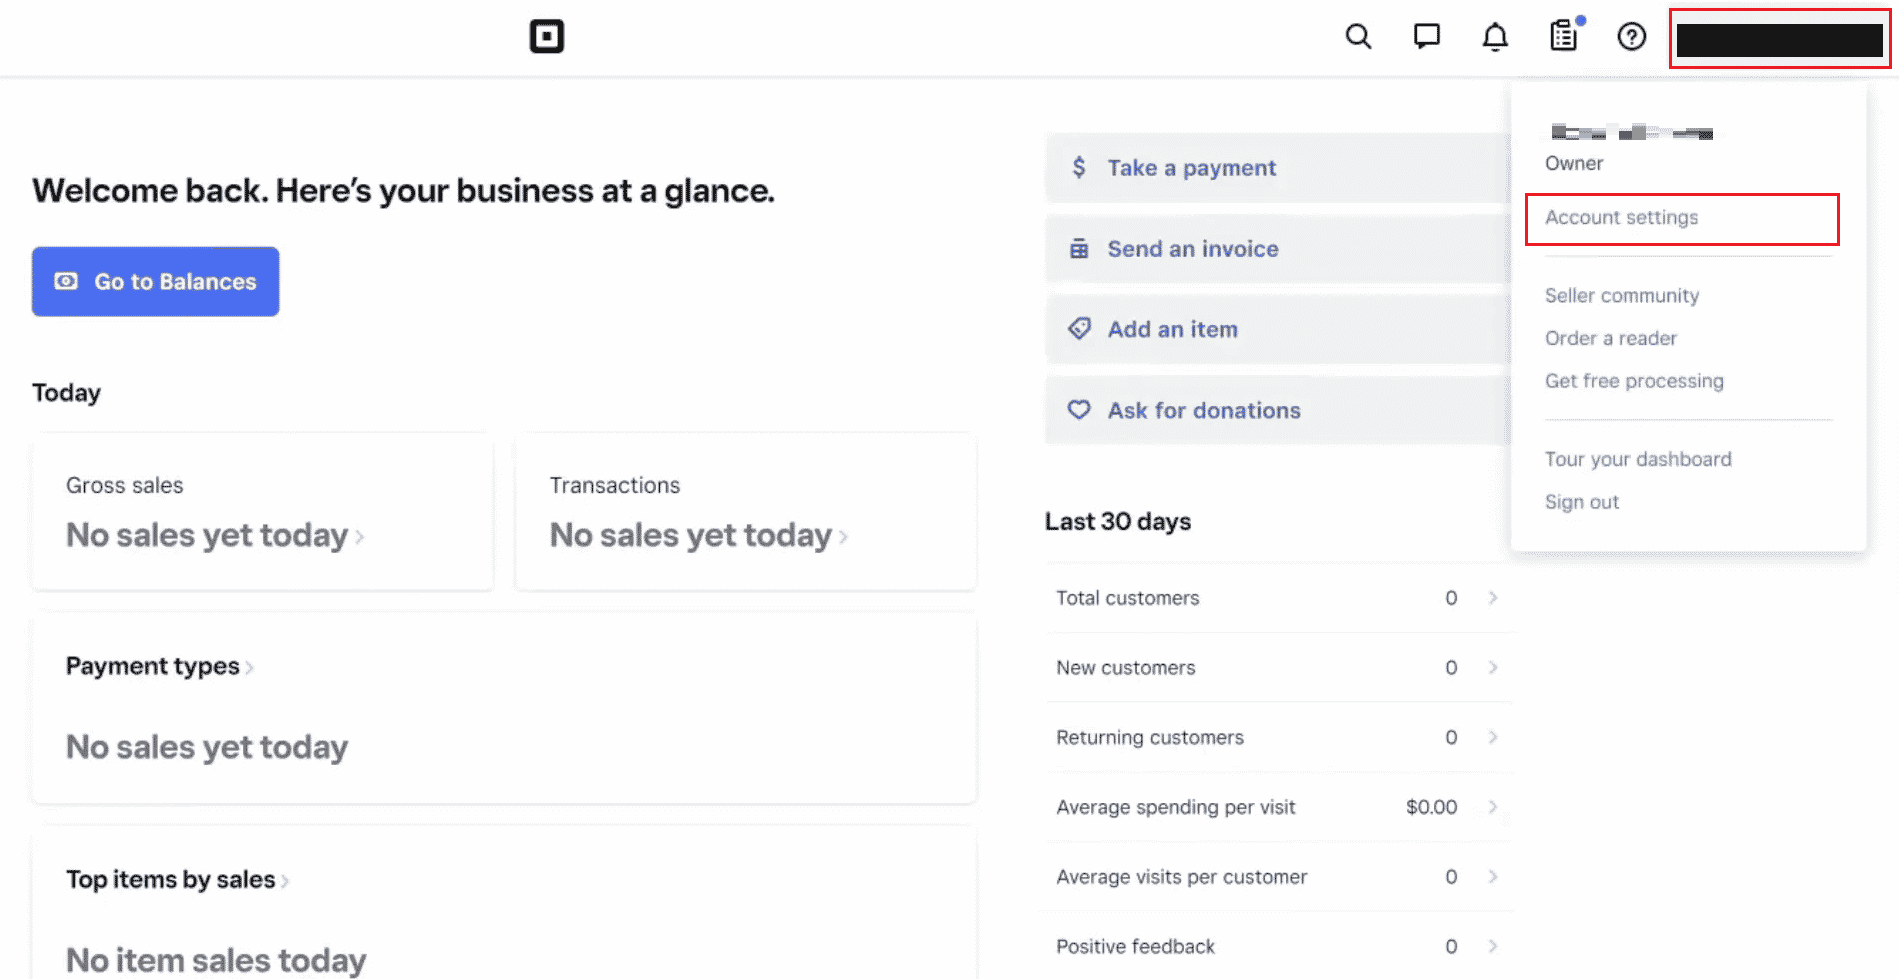 click on your business name - Account settings from the top right corner | can Square legally hold your money